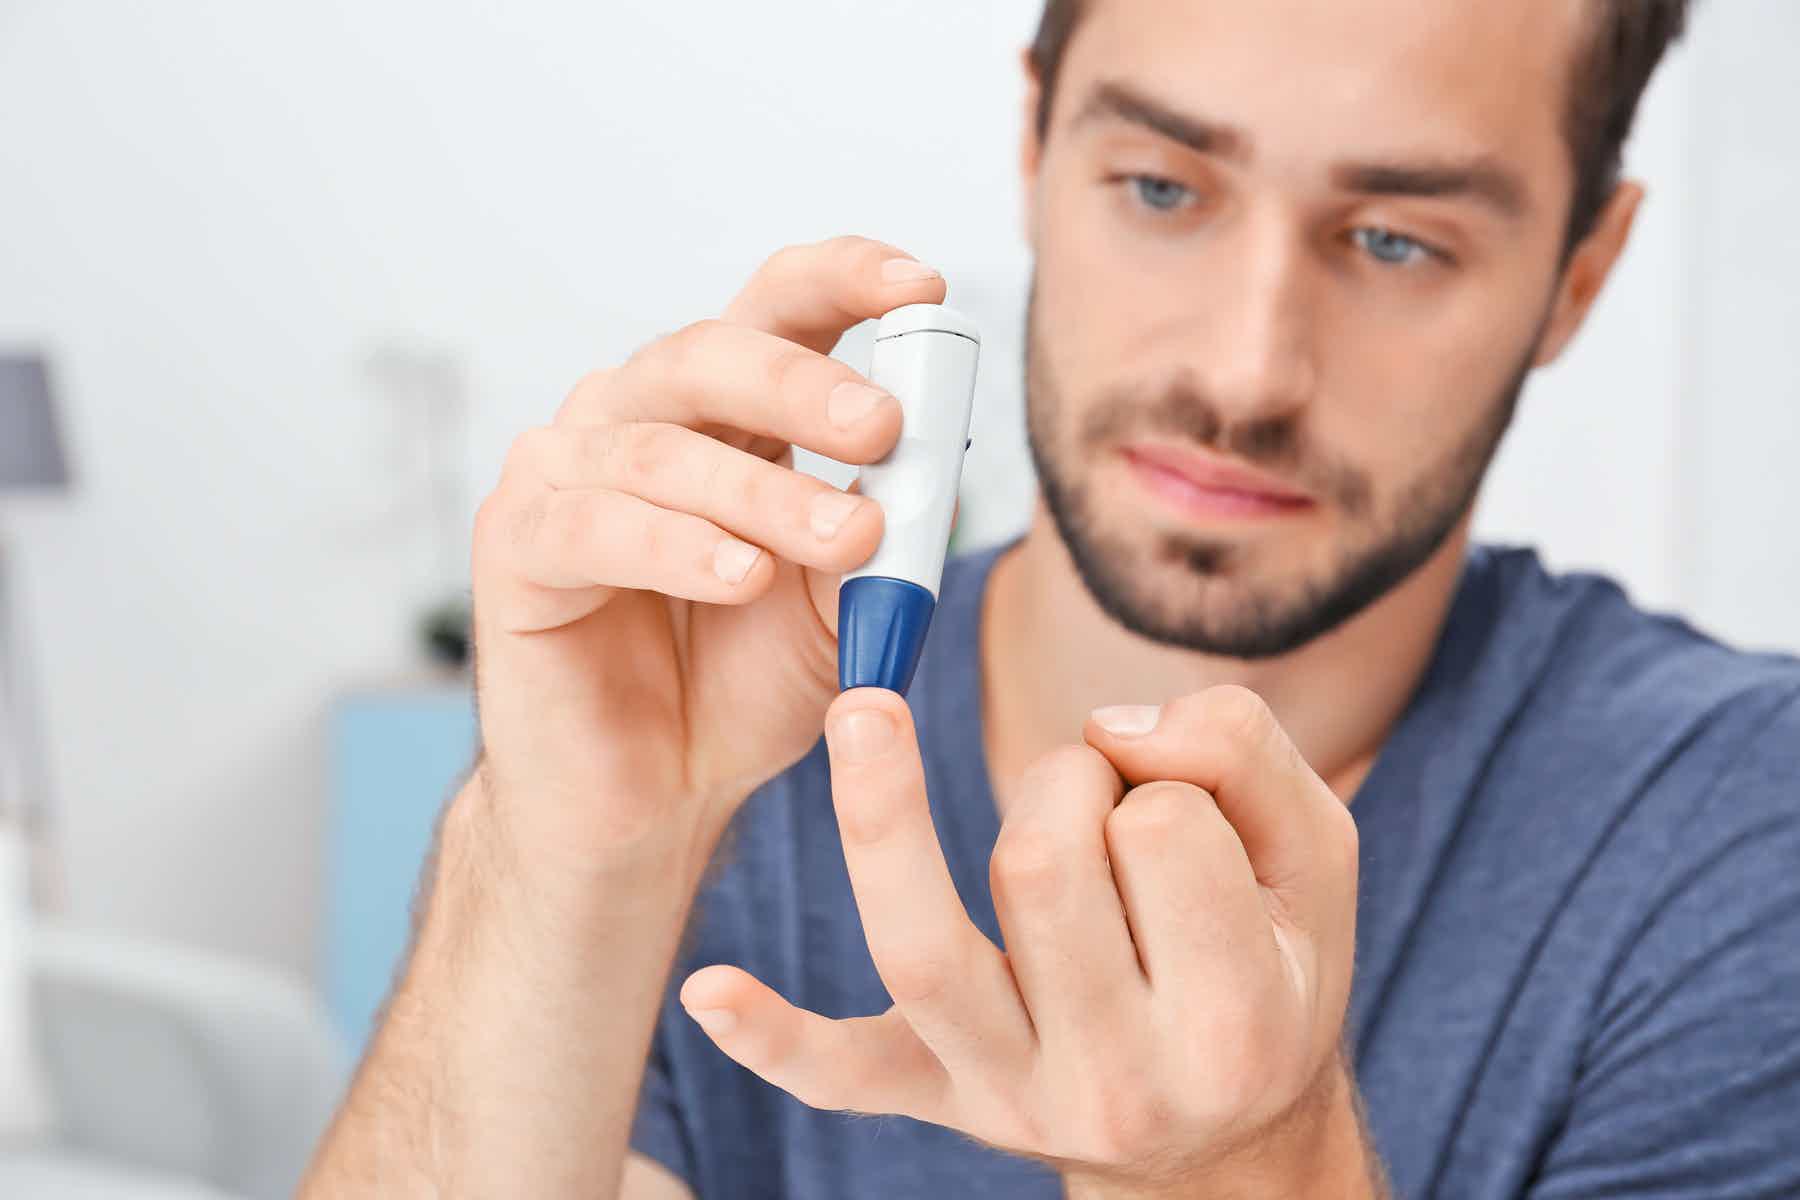 Asthma, diabetes: can I get a COVID vaccination yet?